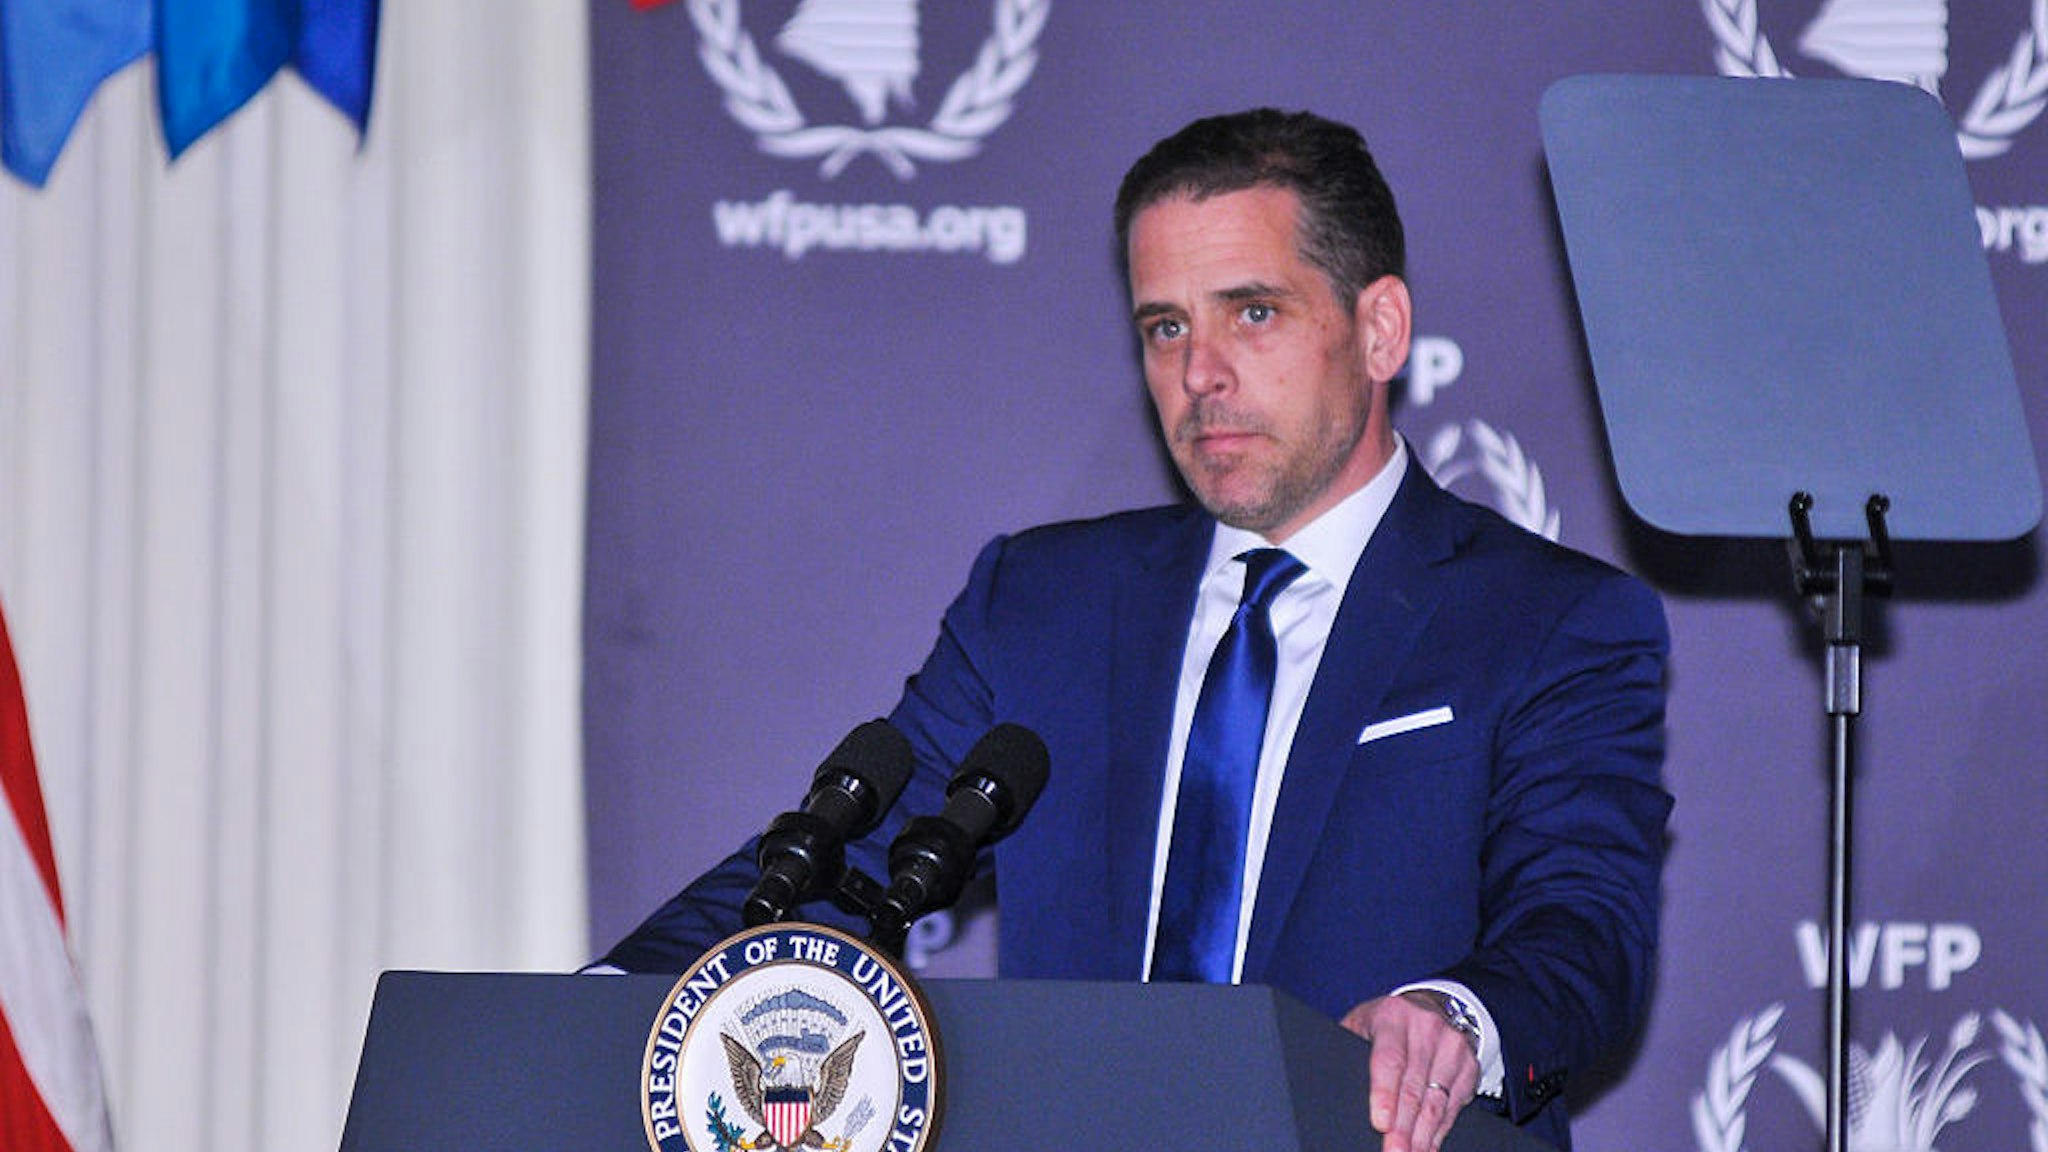 WASHINGTON, DC - APRIL 12: WFP USA Board Chair Hunter Biden speaks during the World Food Program USA's 2016 McGovern-Dole Leadership Award Ceremony at the Organization of American States on April 12, 2016 in Washington, DC. (Kris Connor/WireImage)